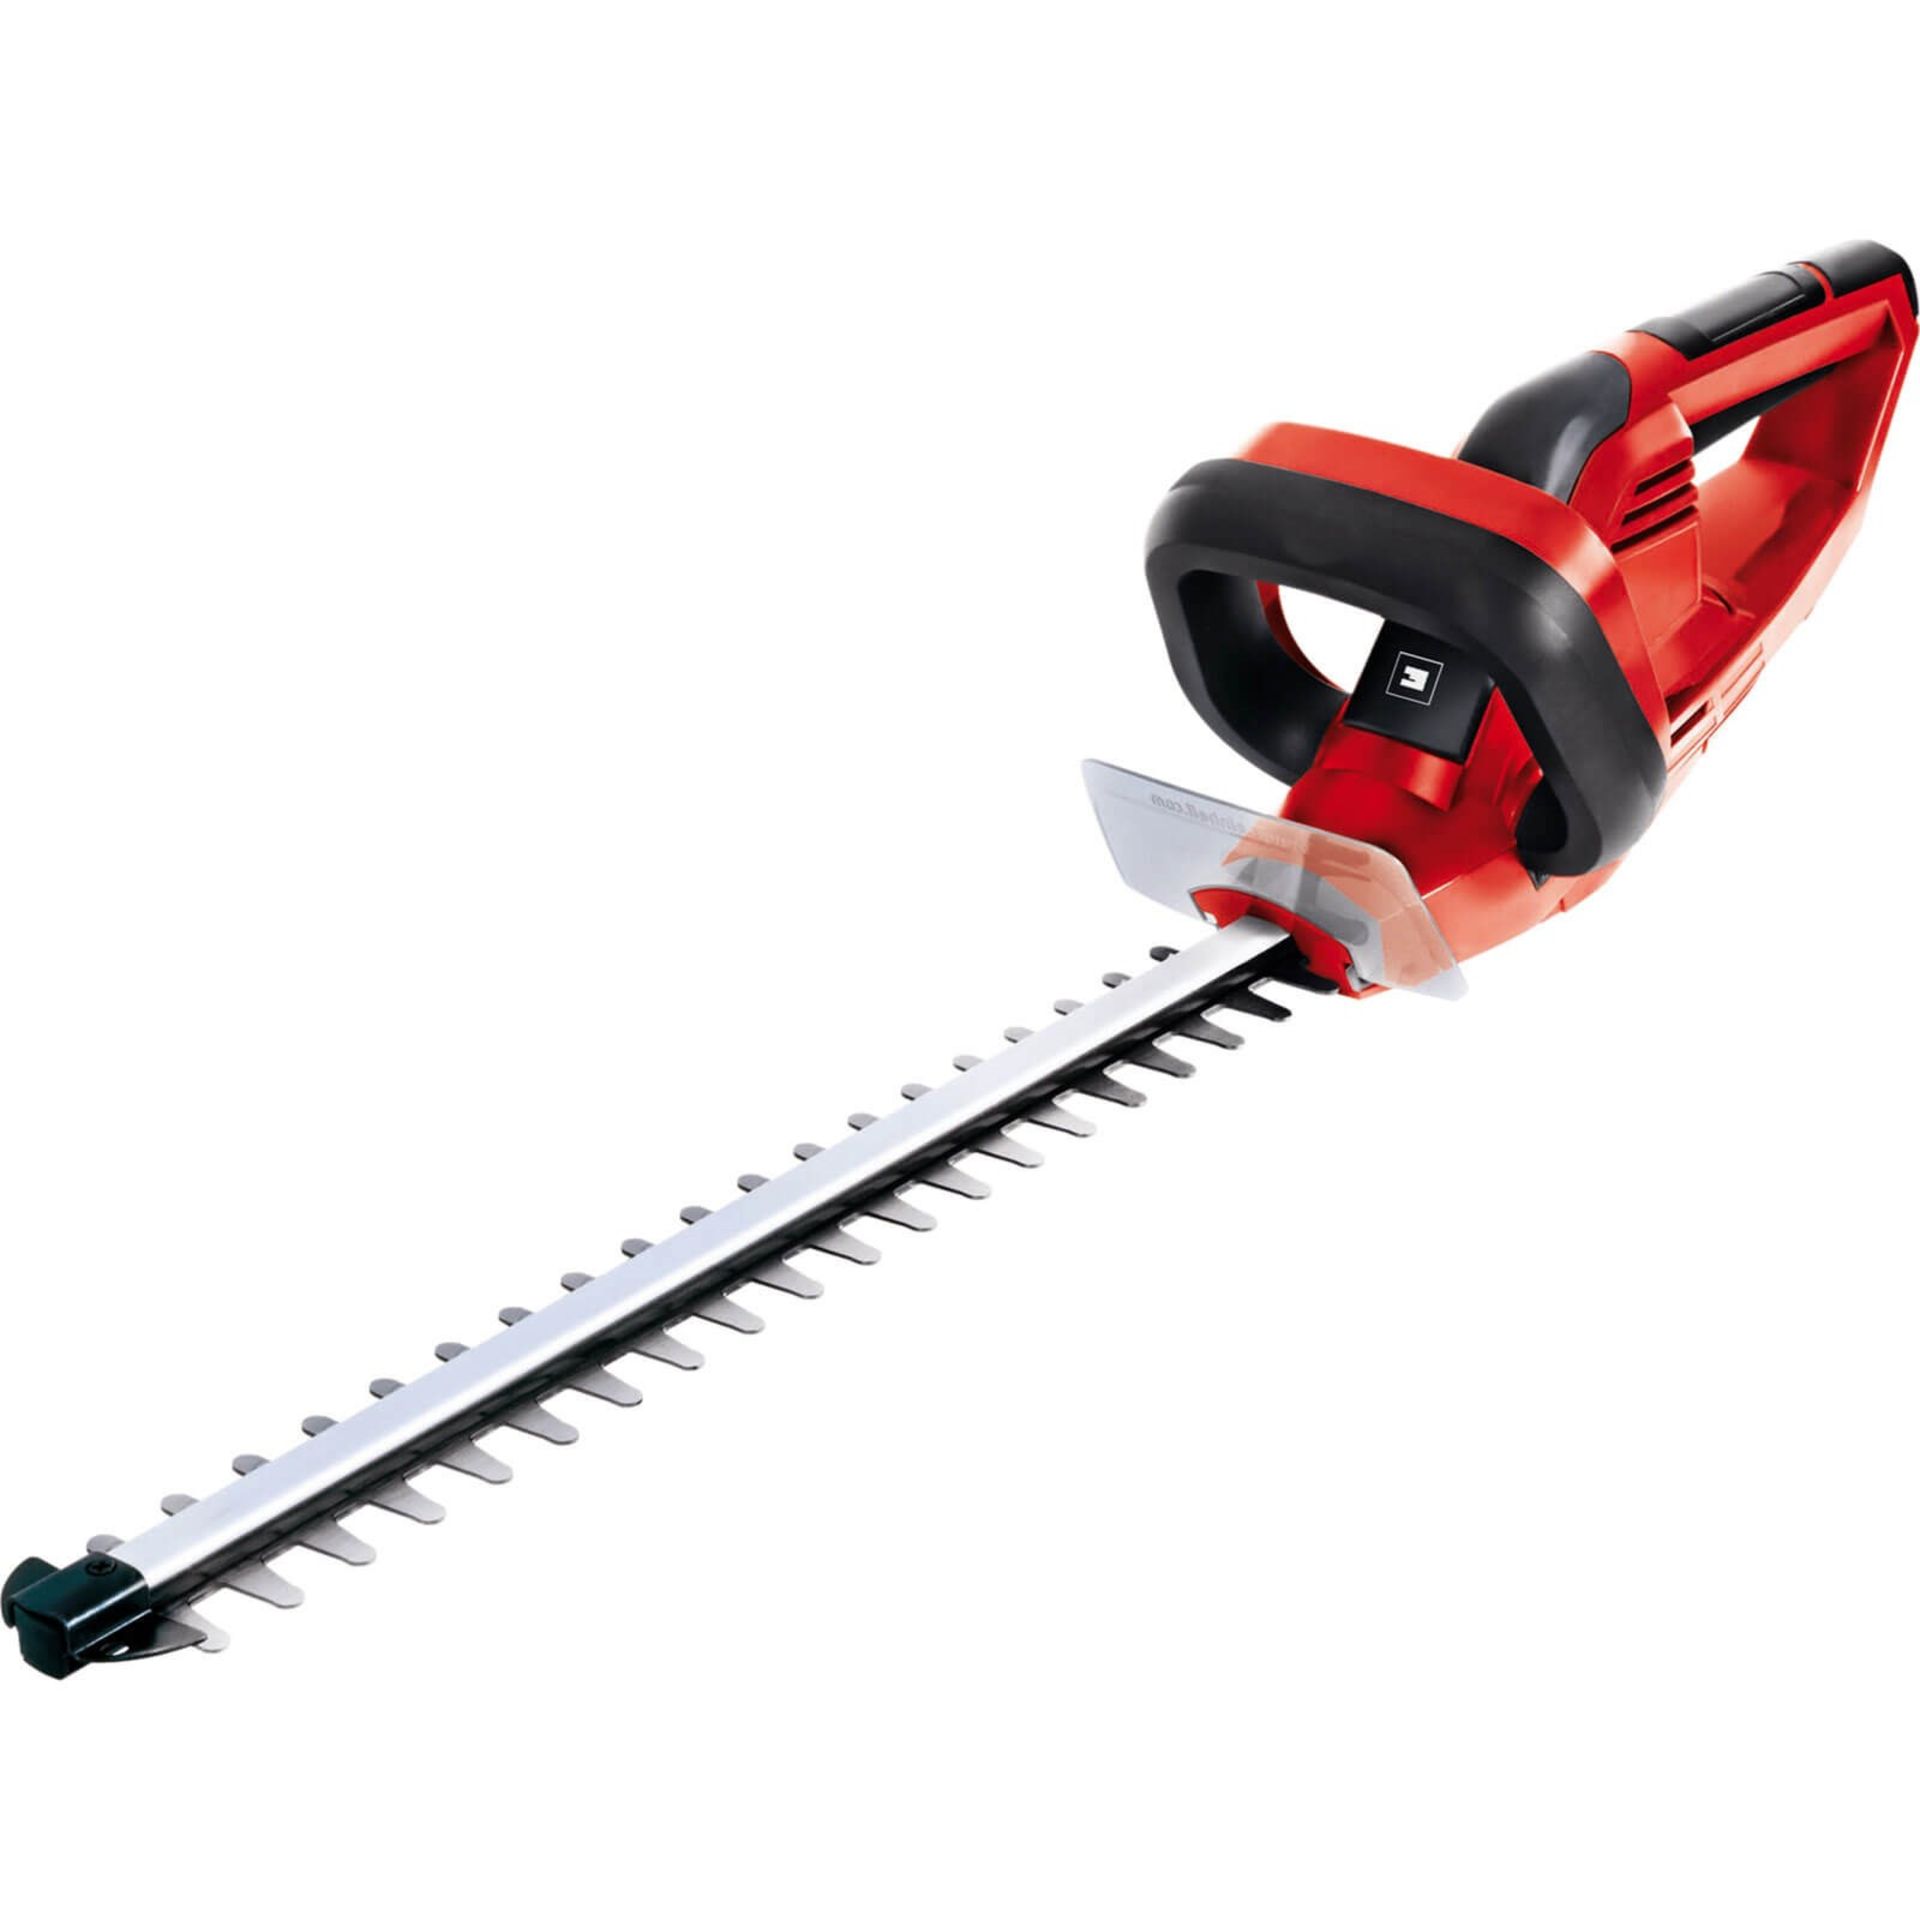 Boxed Einhell Classic Electric Hedge Trimmer Tested Working